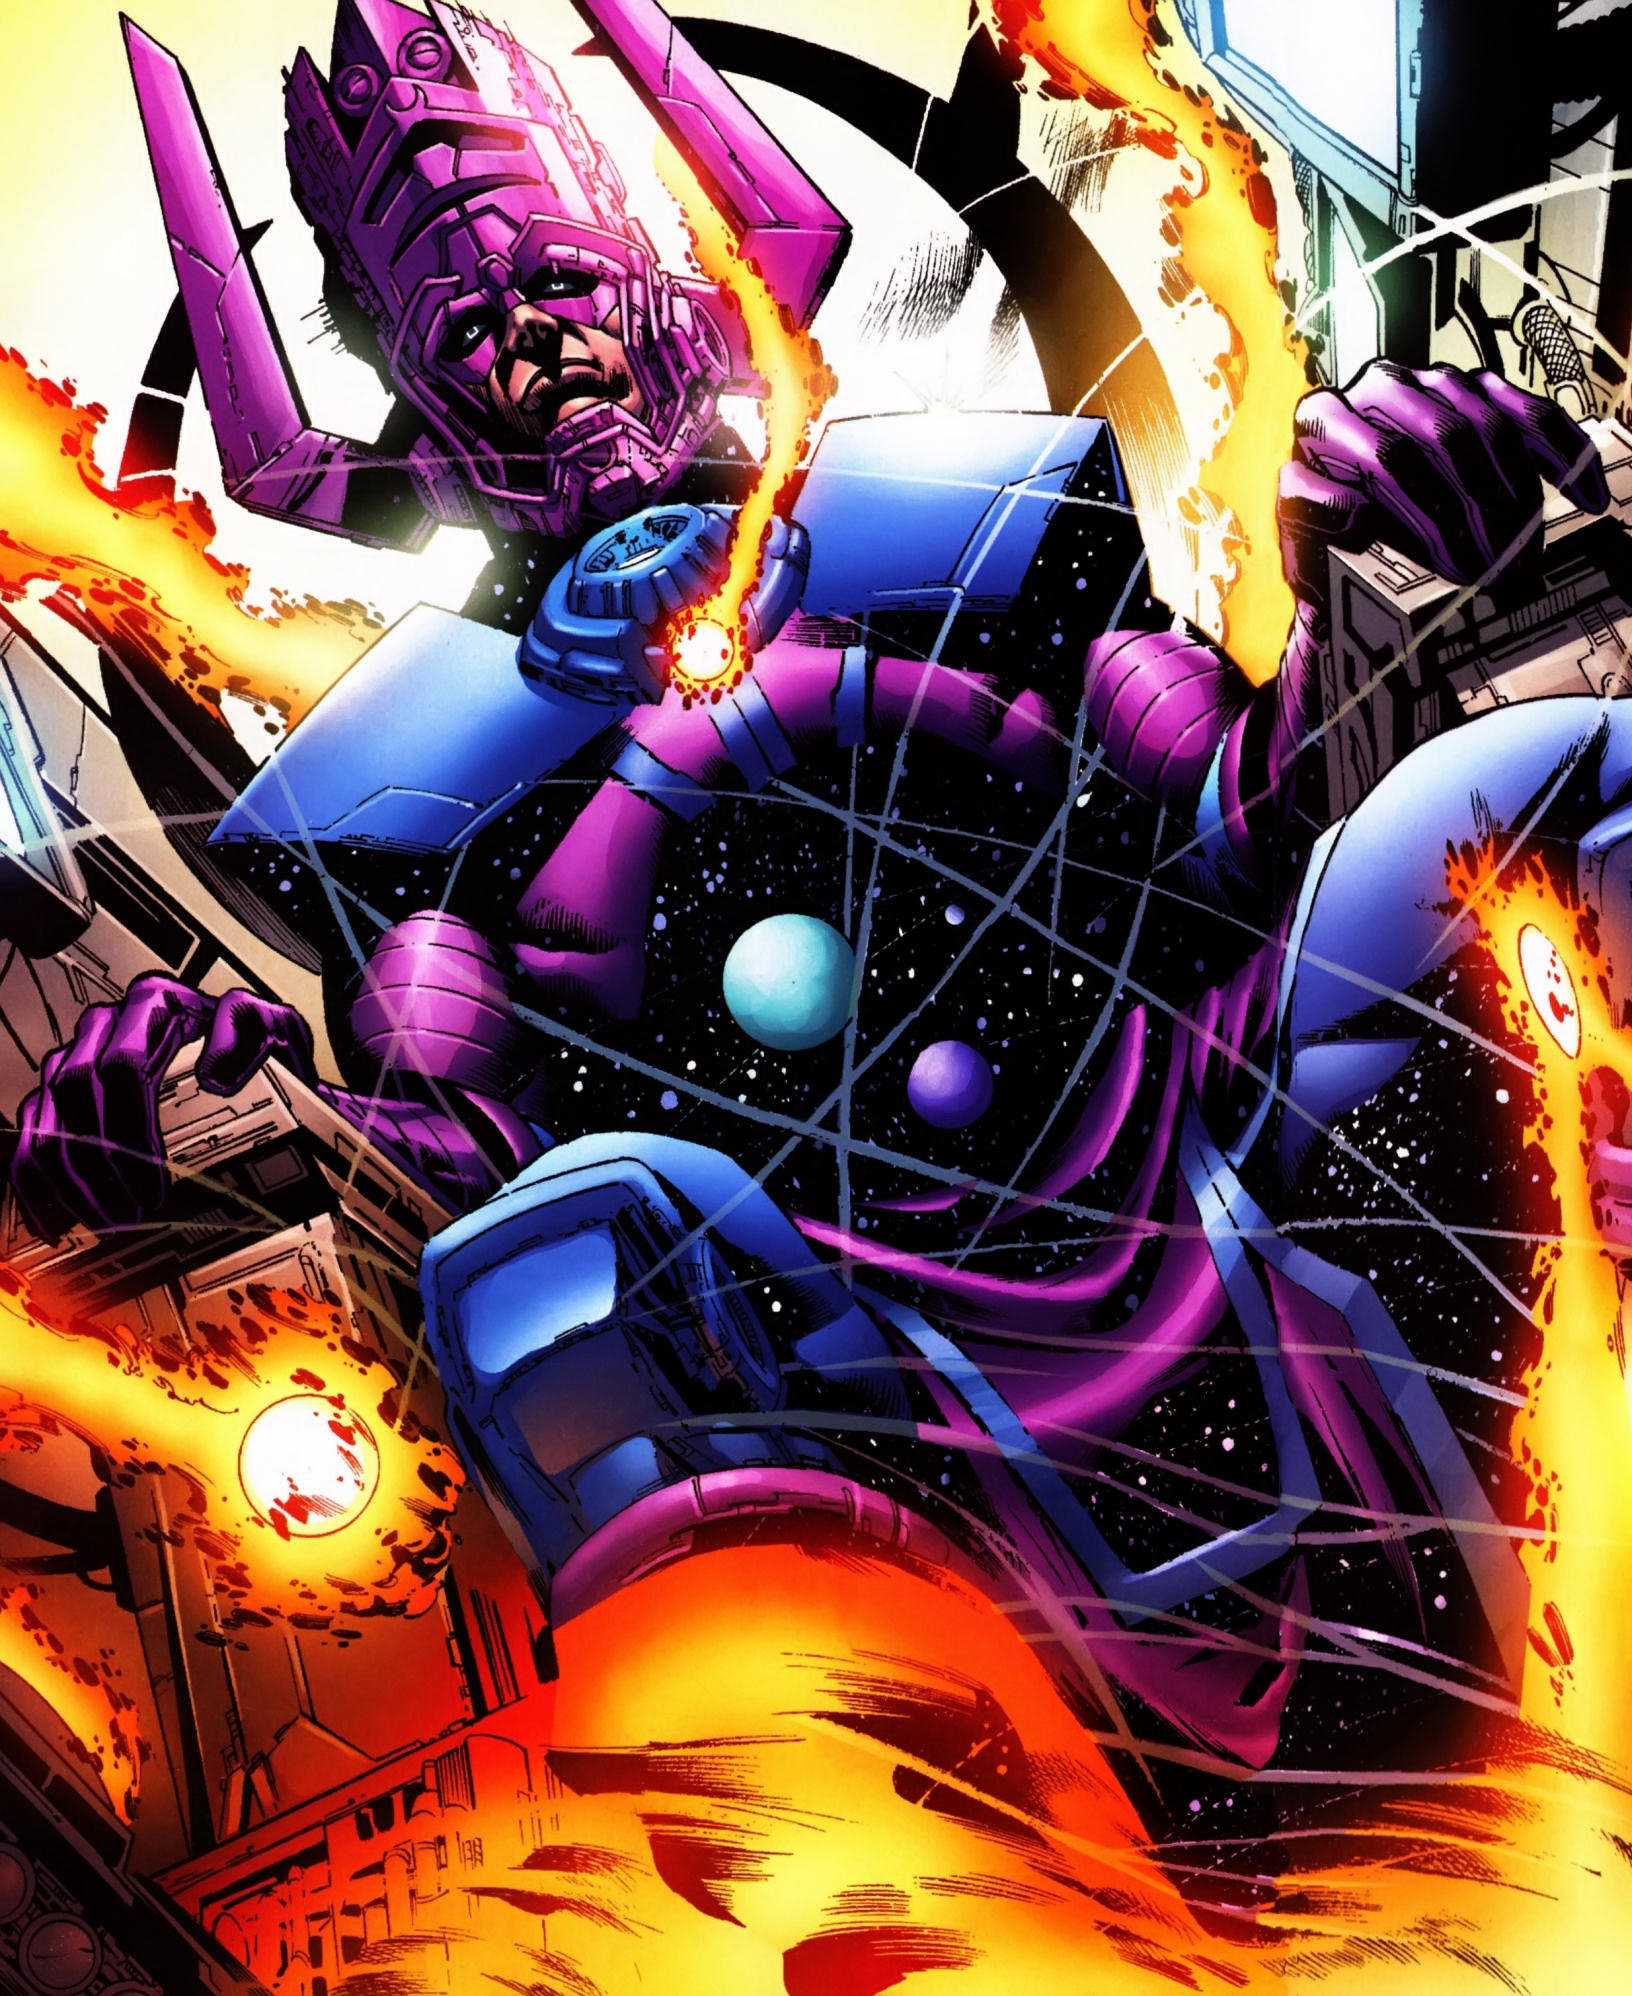 Galactus            One of the strongest in the universe. Eats entire planets, possesses vast knowledge, unlimited cosmic power, and gave beings as strong as the Silver Surfer their power and is still in an entire different power league.